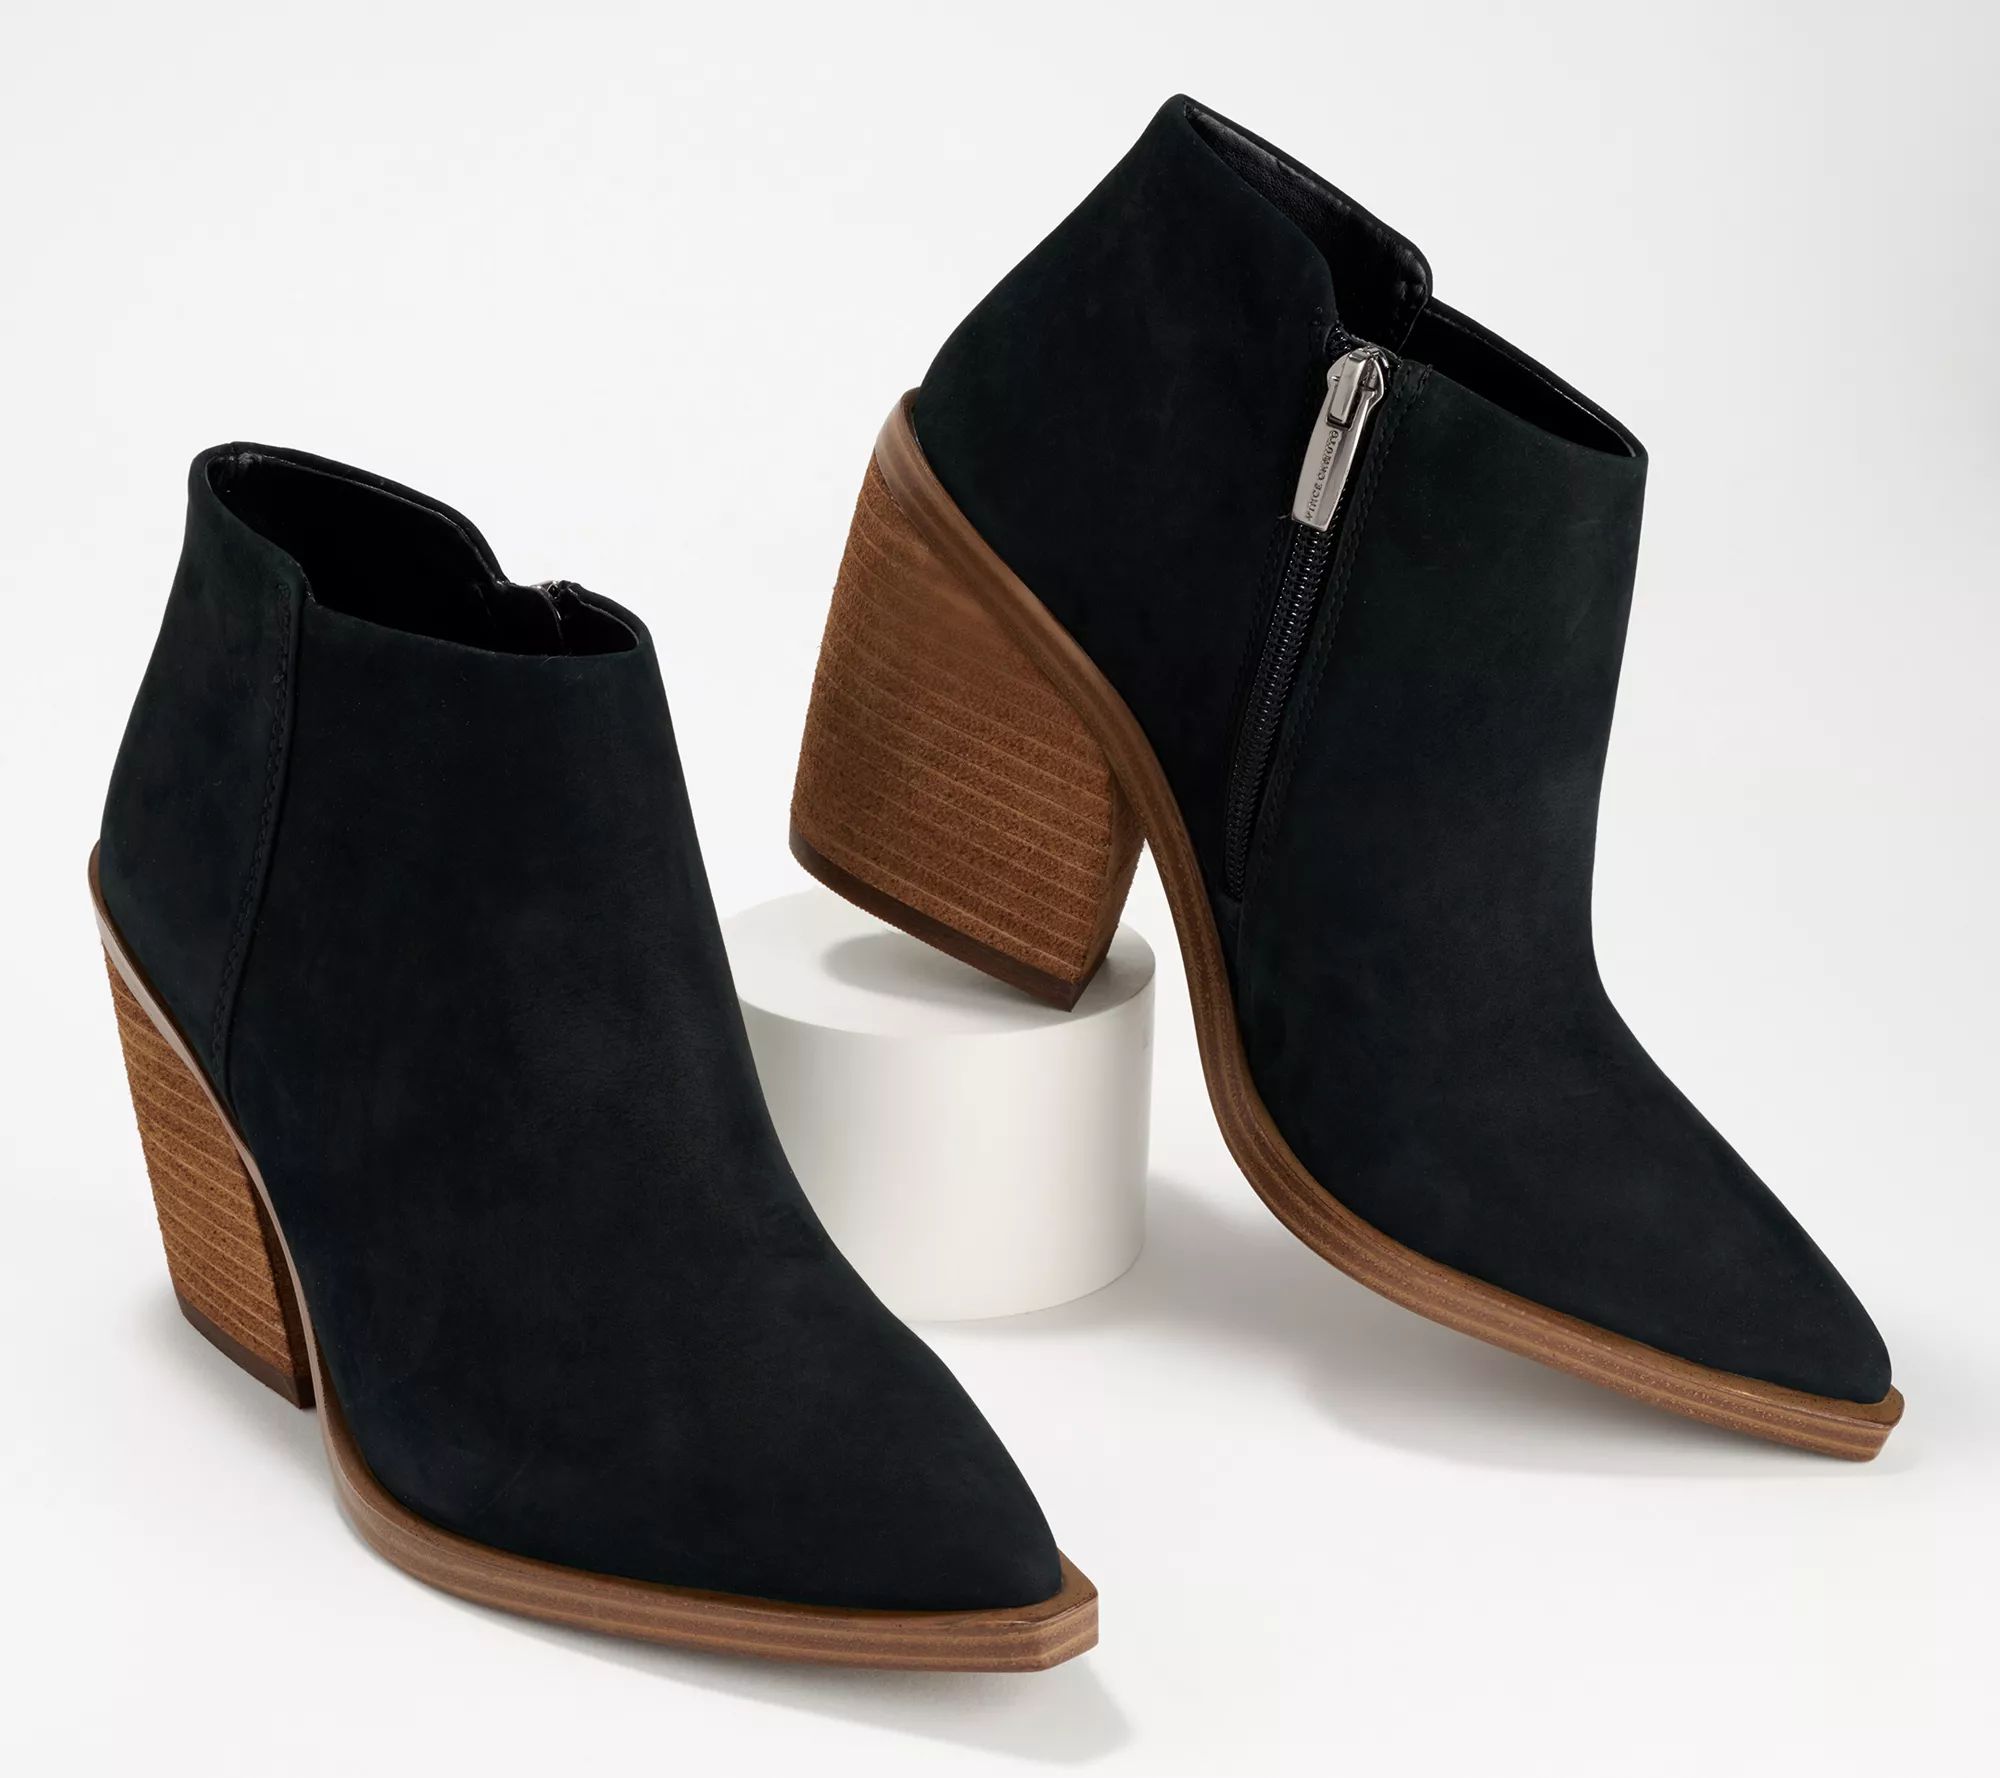 Vince Camuto Leather or Suede Western Booties - Geeanne | QVC